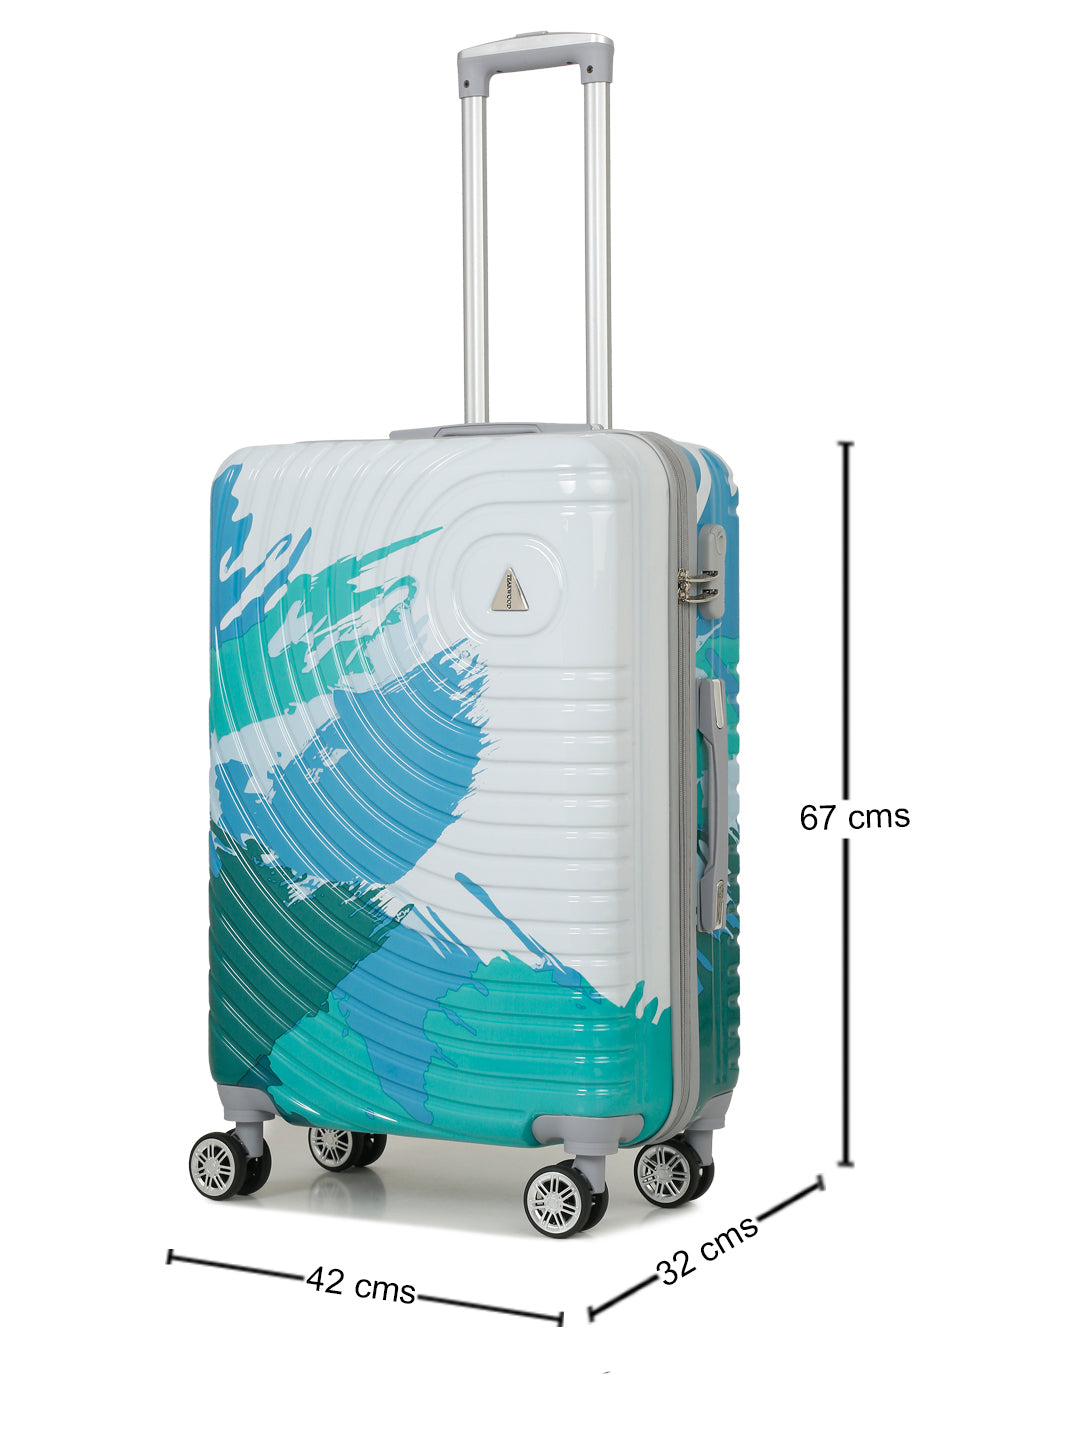 Buy Skybags Crest Cabin Hard Luggage (55 cm) | Polycarbonate Luggage Trolley  with 8 Wheels and TSA Approved Lock| Super Lemon Hydrangea | Unisex at  Amazon.in